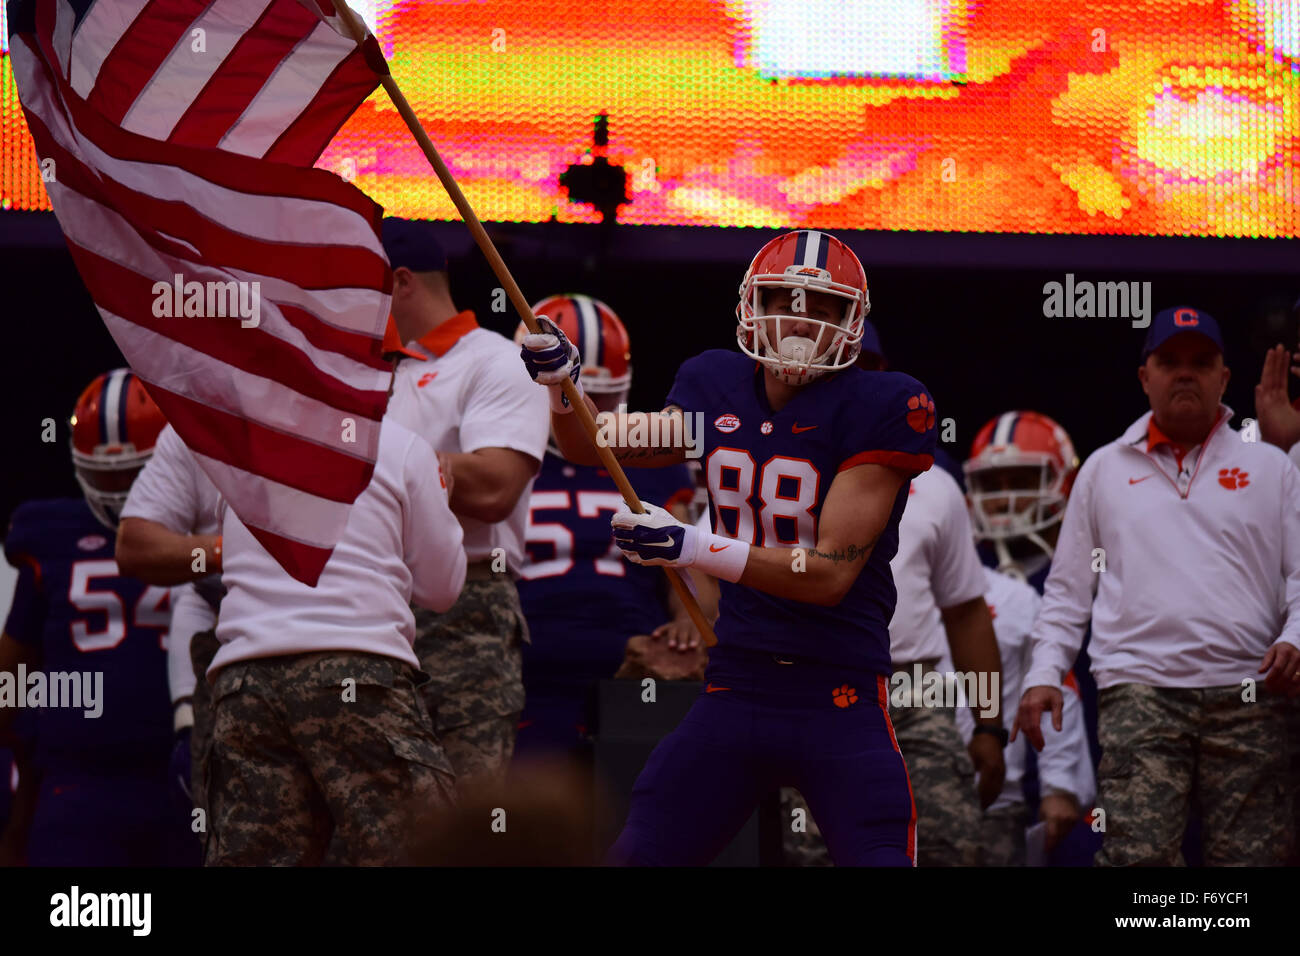 Clemson wide receiver Sean Mac Lain (88) carries the American flag in honor of military servicemen for military appreciation day during the NCAA college football game between Wake Forest and Clemson on Saturday Nov. 21, 2015 at Memorial Stadium, in Clemson, S.C. Jacob Kupferman/CSM Stock Photo